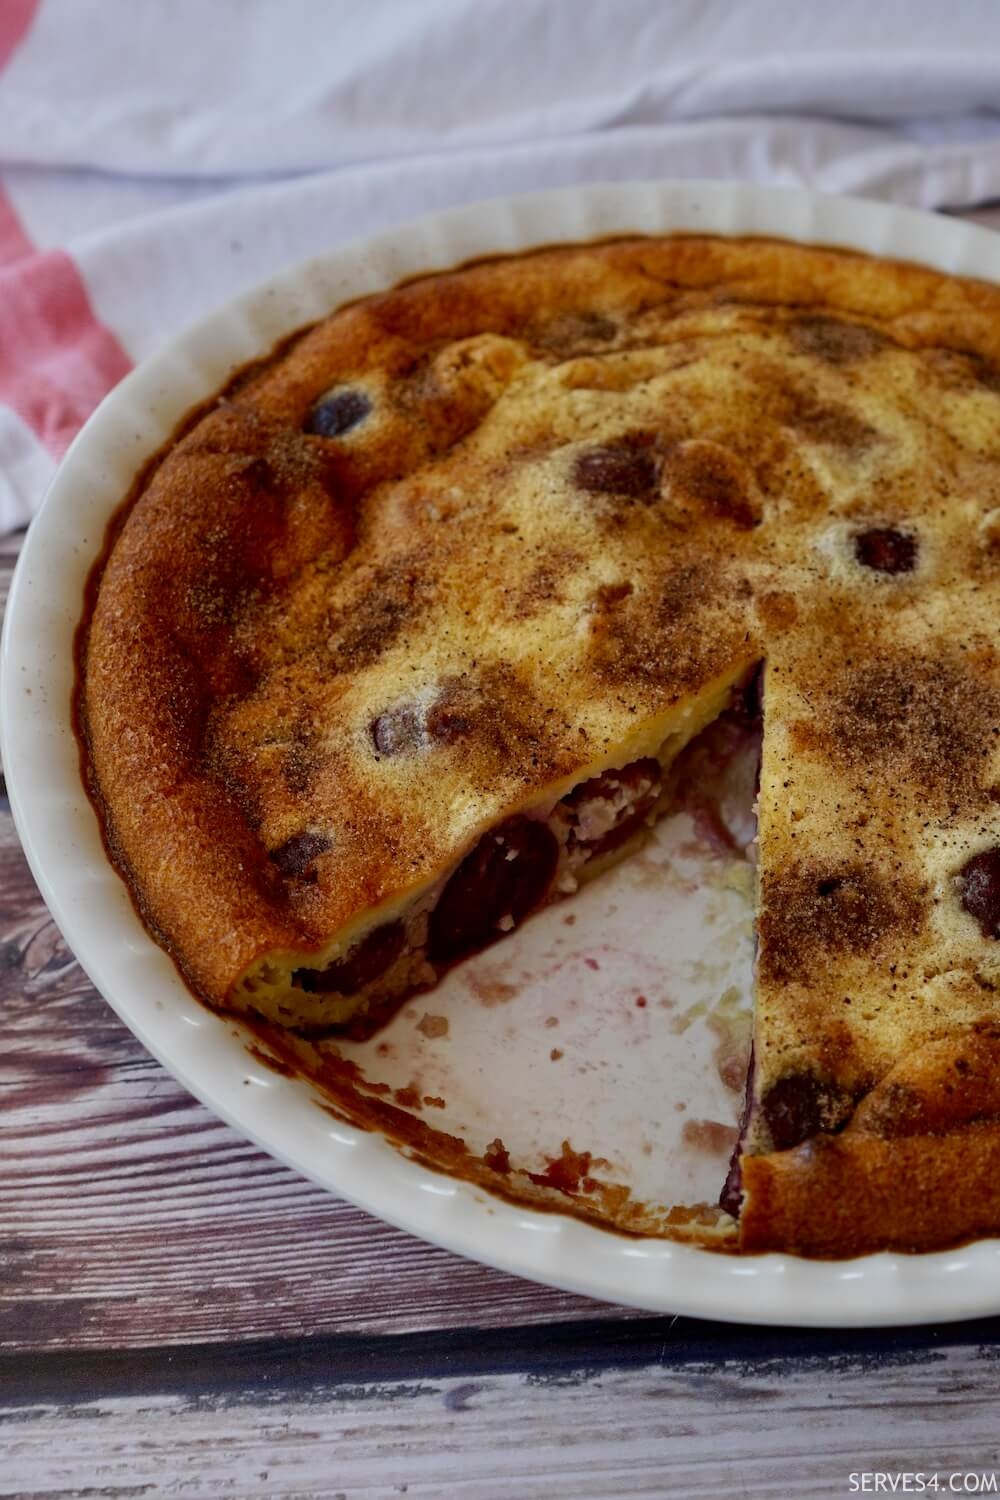 This scrumptious cherry clafoutis is super easy to make and the best way to make the most of the short but marvellous cherry season!